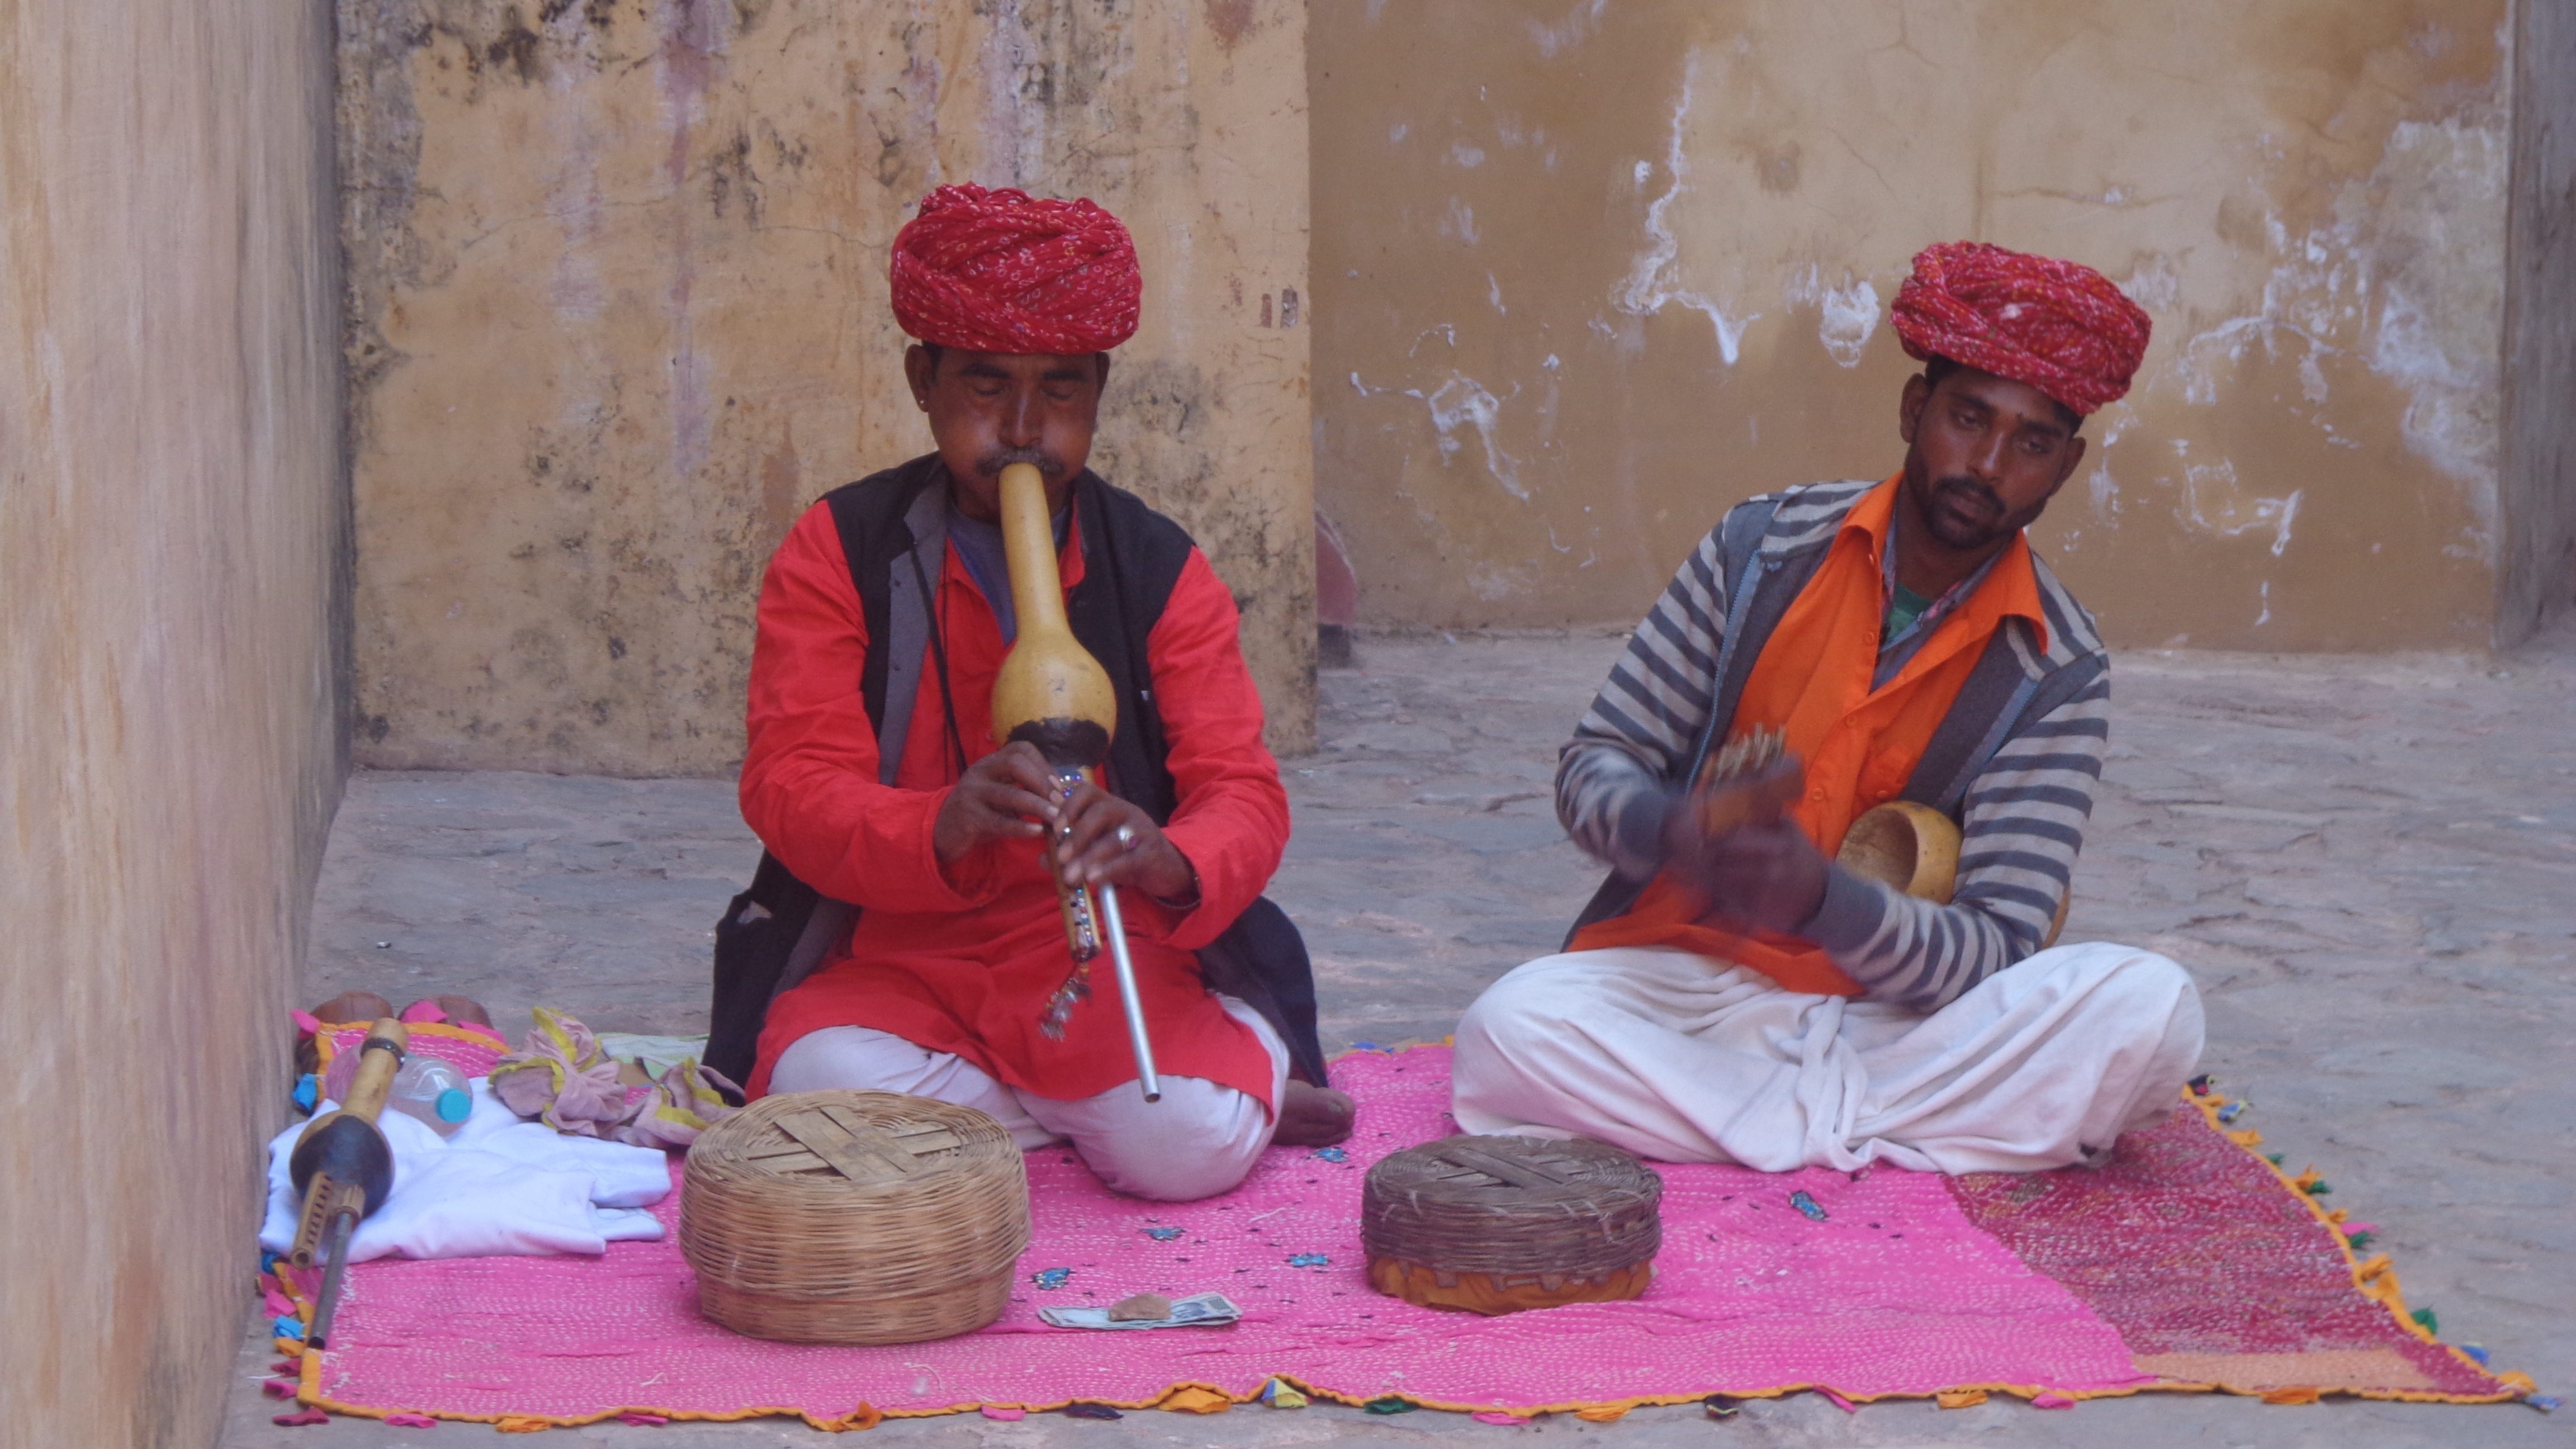 MUSICAL. To add to the ambiance, musicians dressed in traditional garb, play music in Amber Fort 